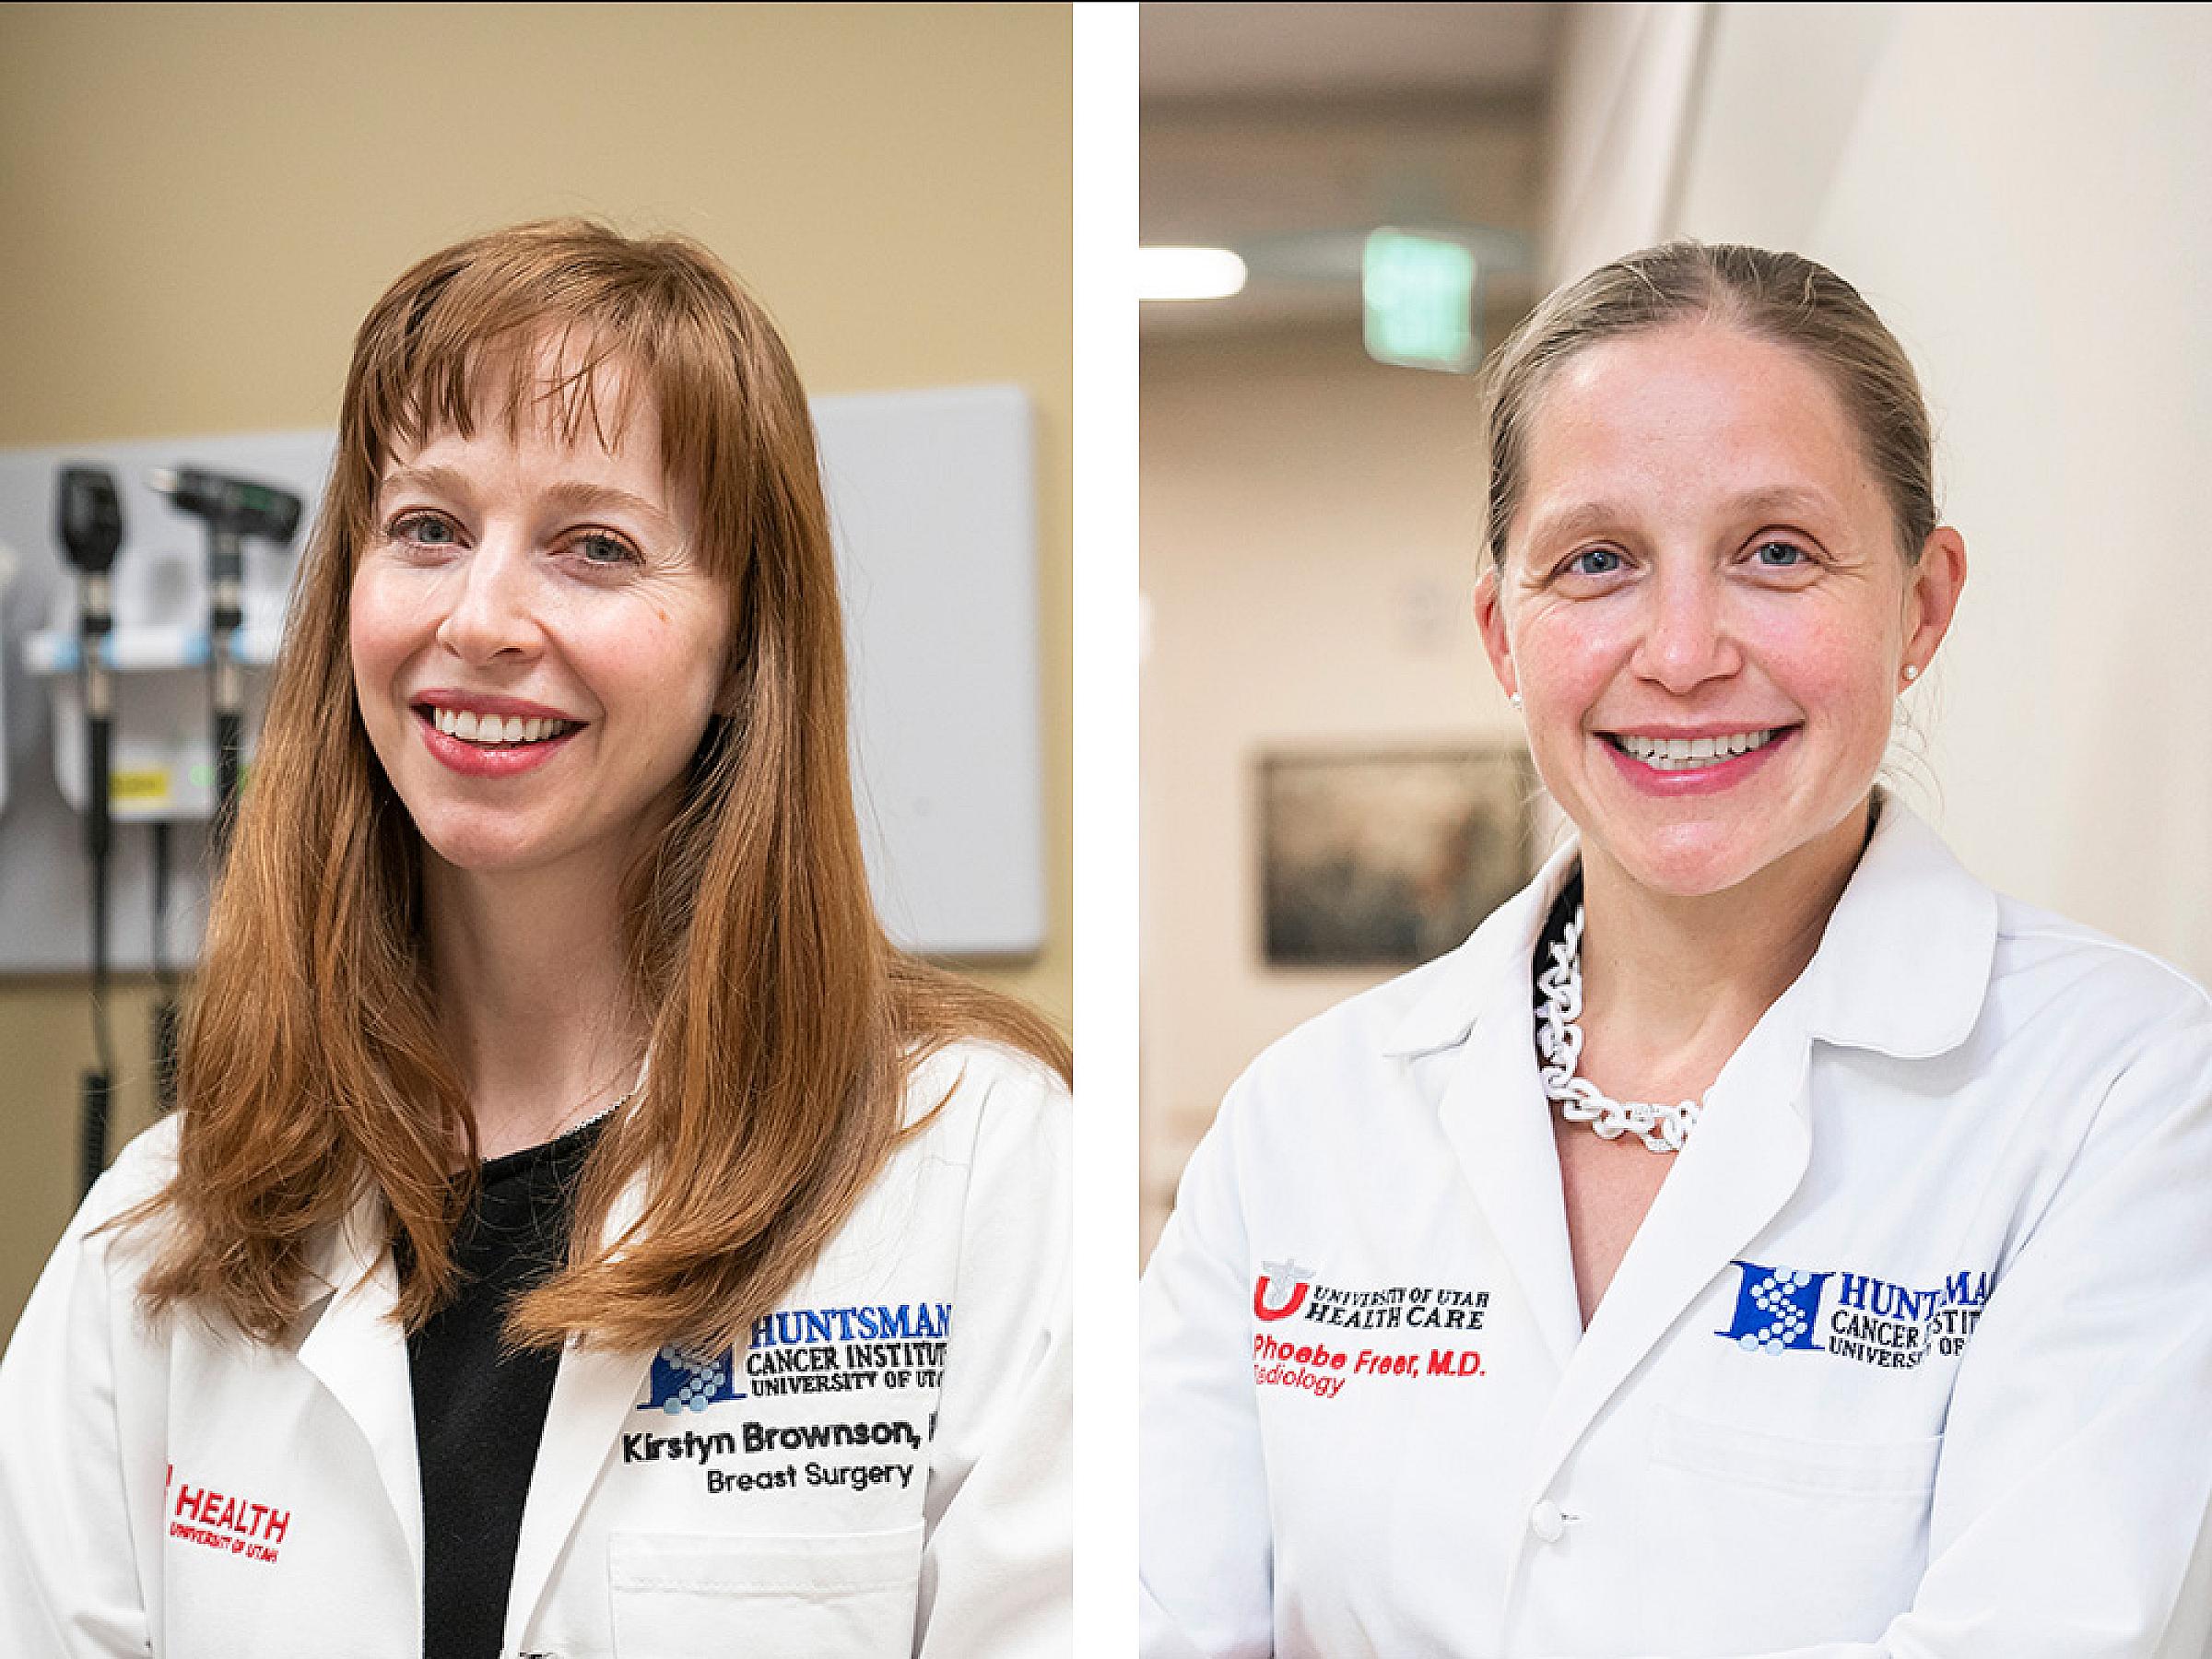 Kirstyn Brownson, MD (left) and Phoebe Freer, MD (right)